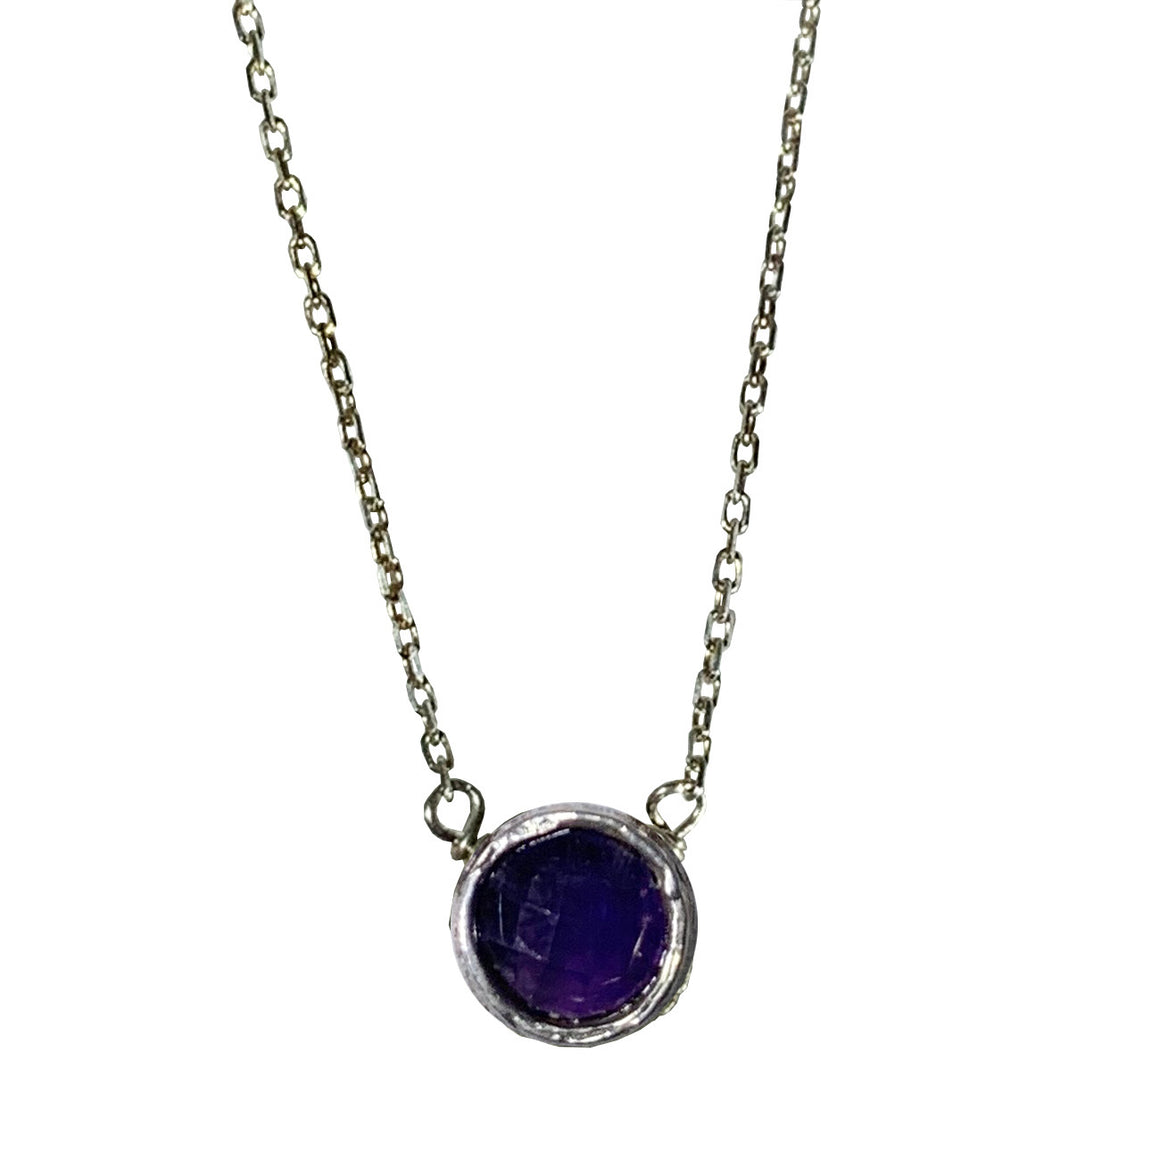 Amethyst and Sterling Pixie Necklace